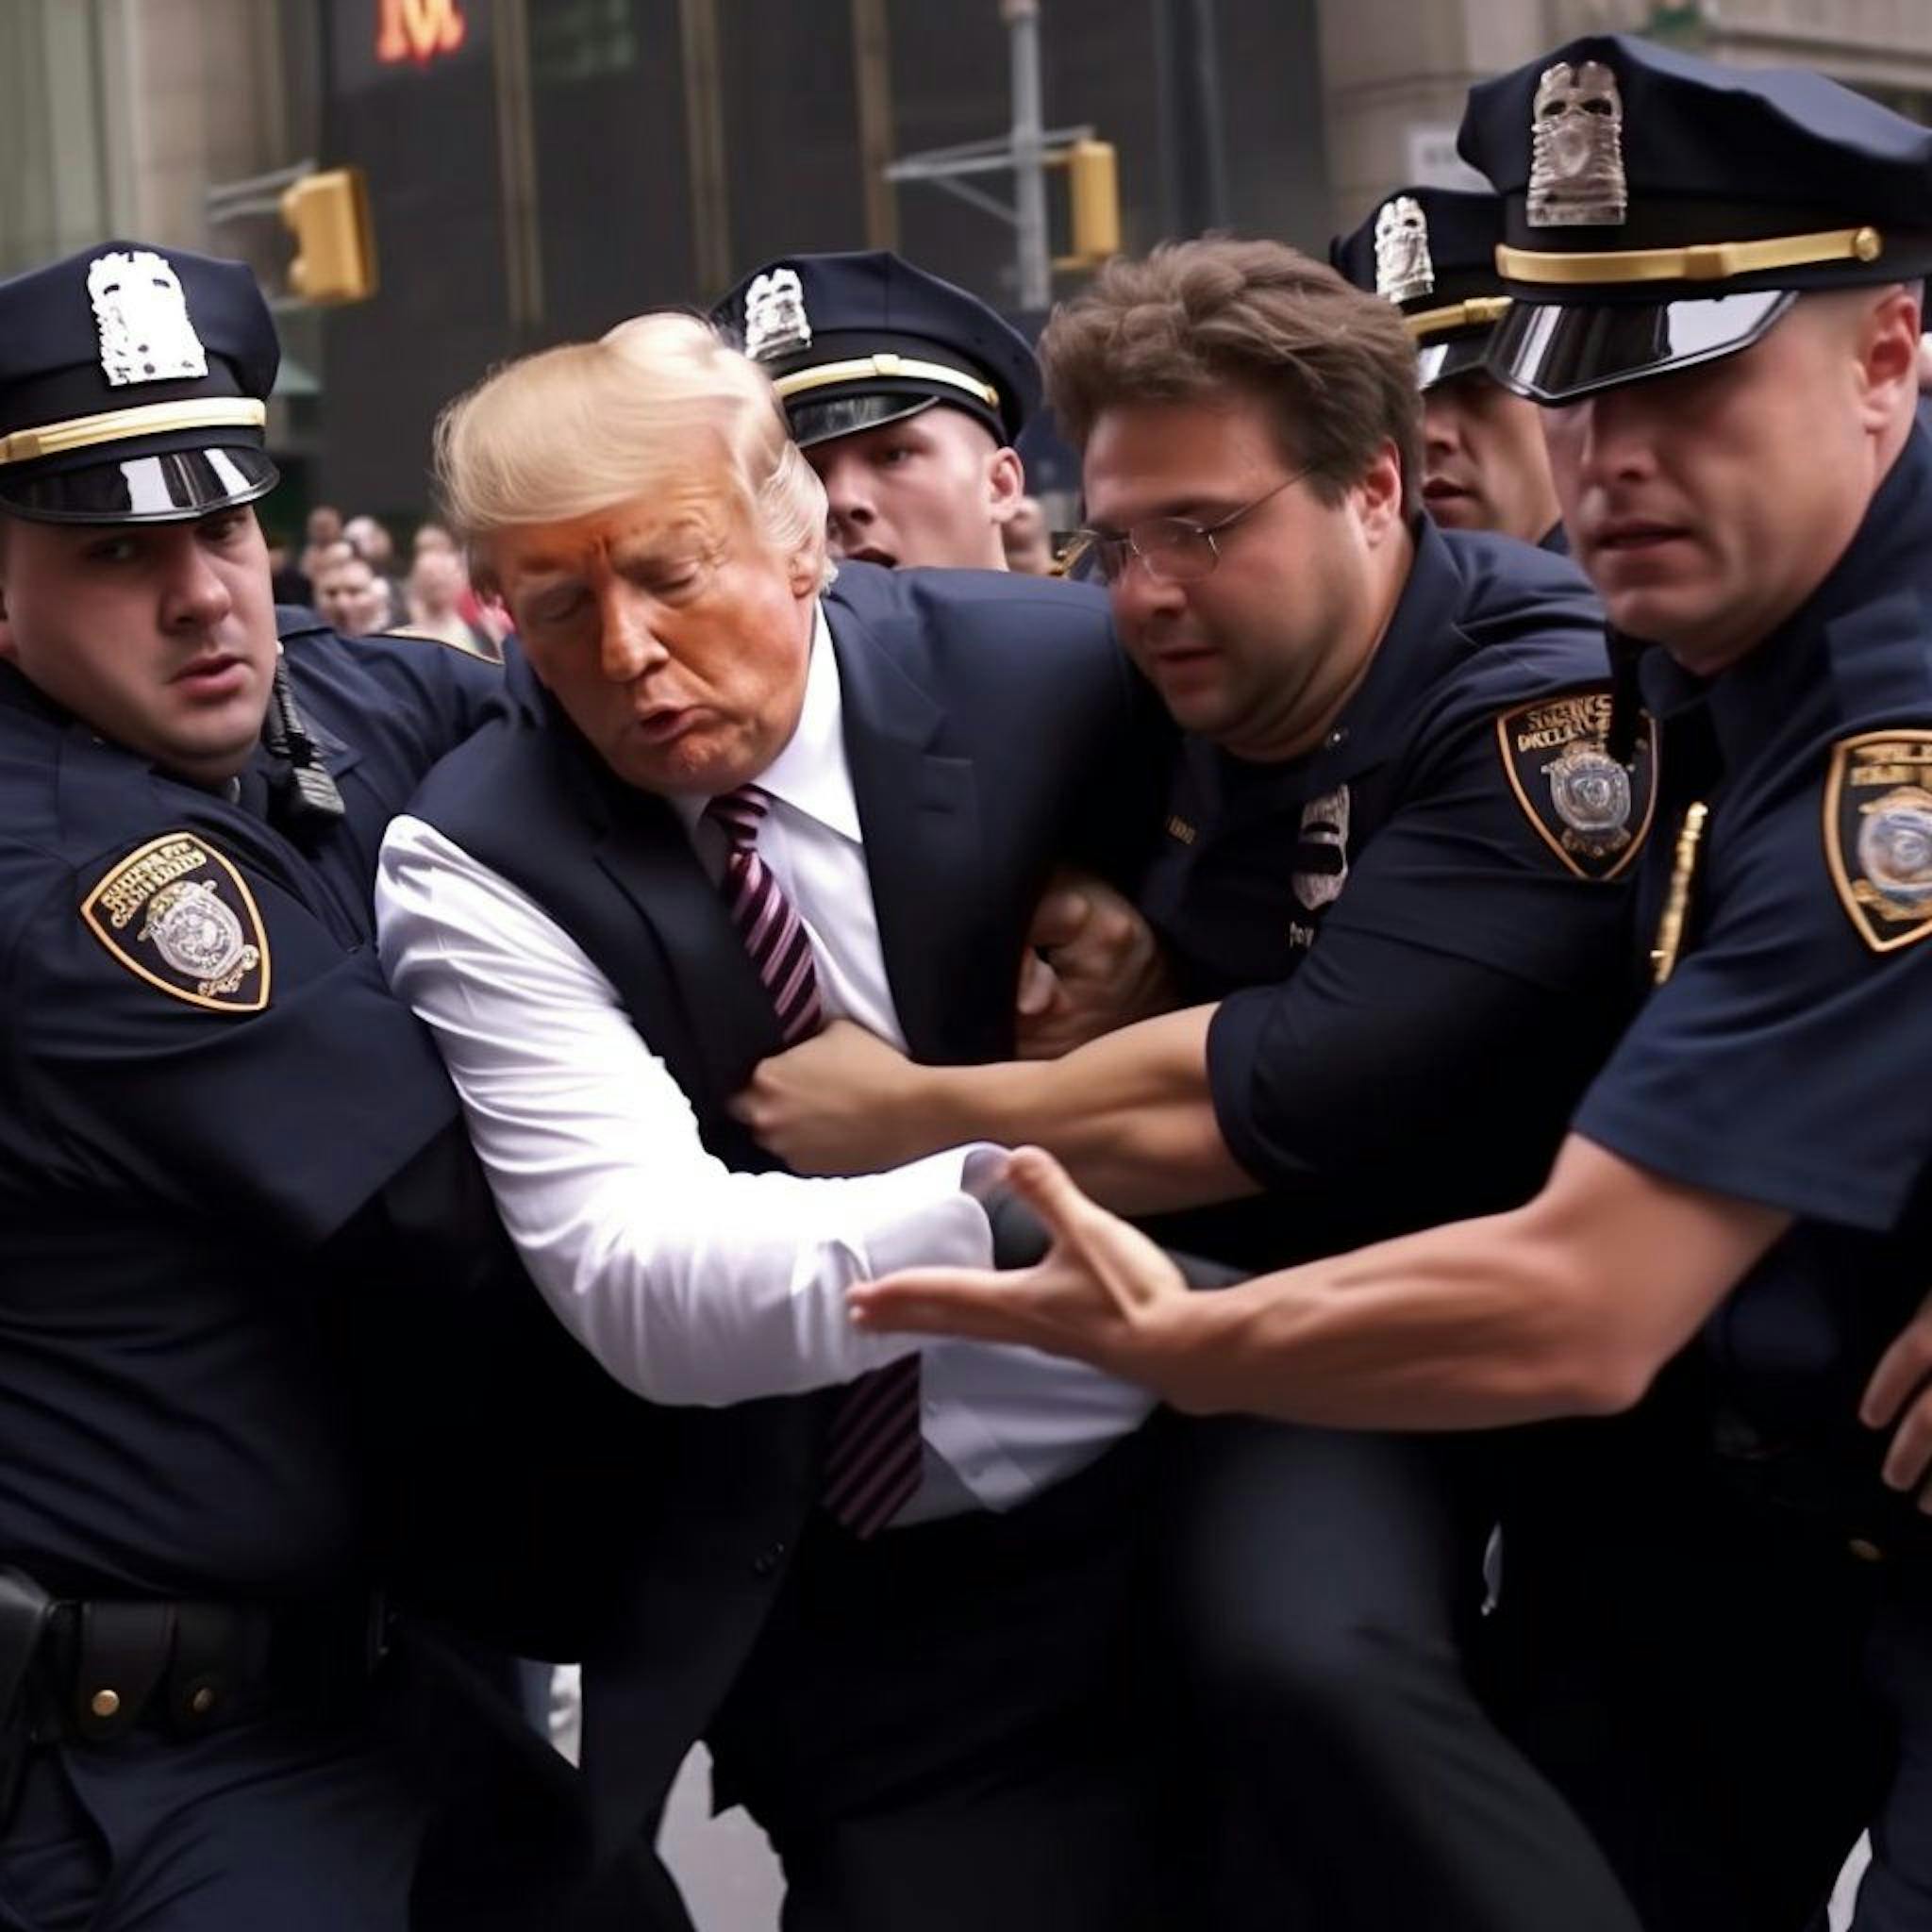 A picture generated by midjourney, showing Donald Trump arrested by the police, Unknown Copyright